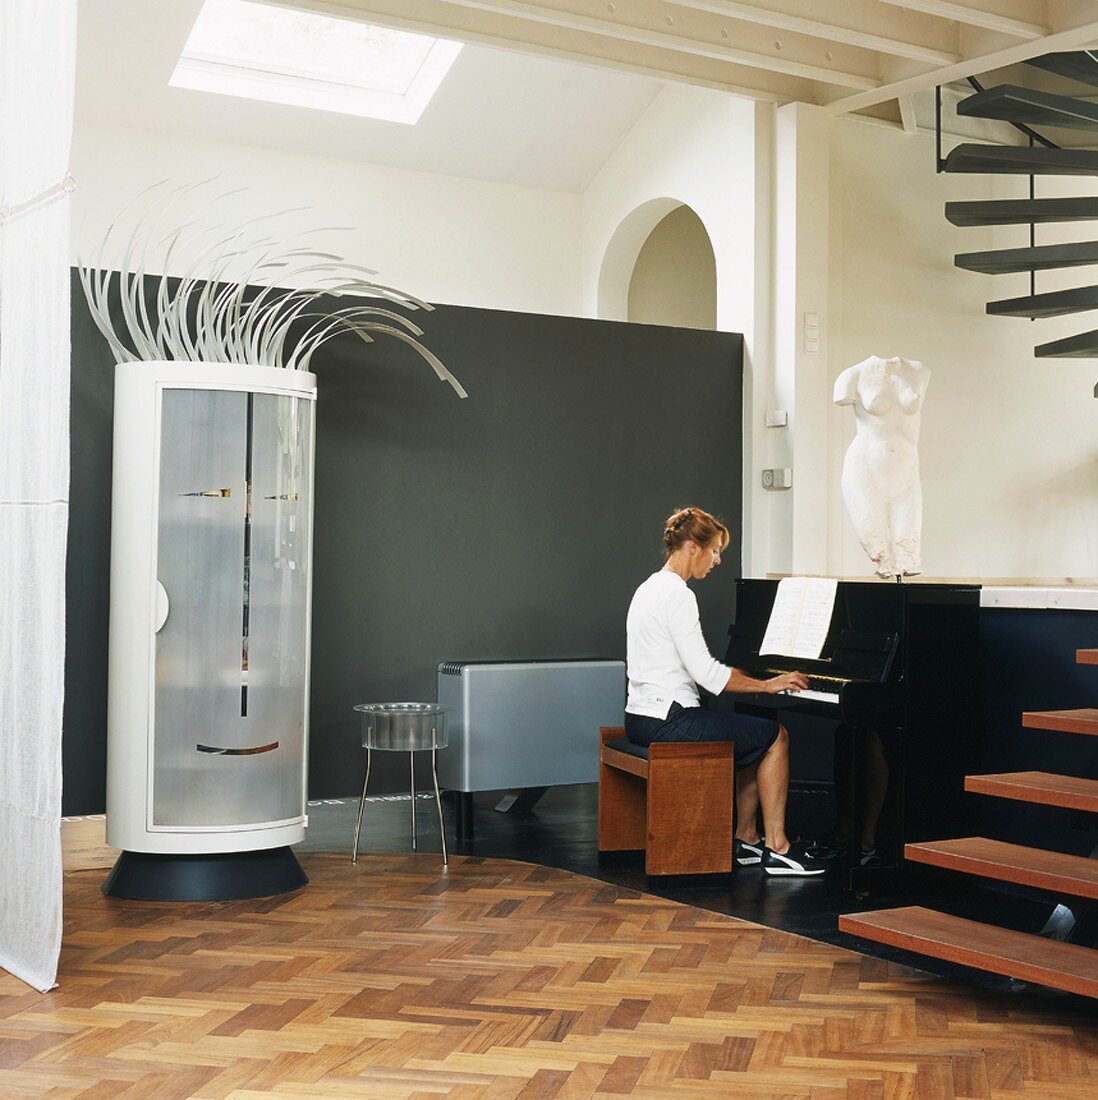 Whimsical cylindrical cupboard with stylised face and hair next to woman playing piano in loft apartment with open staircase